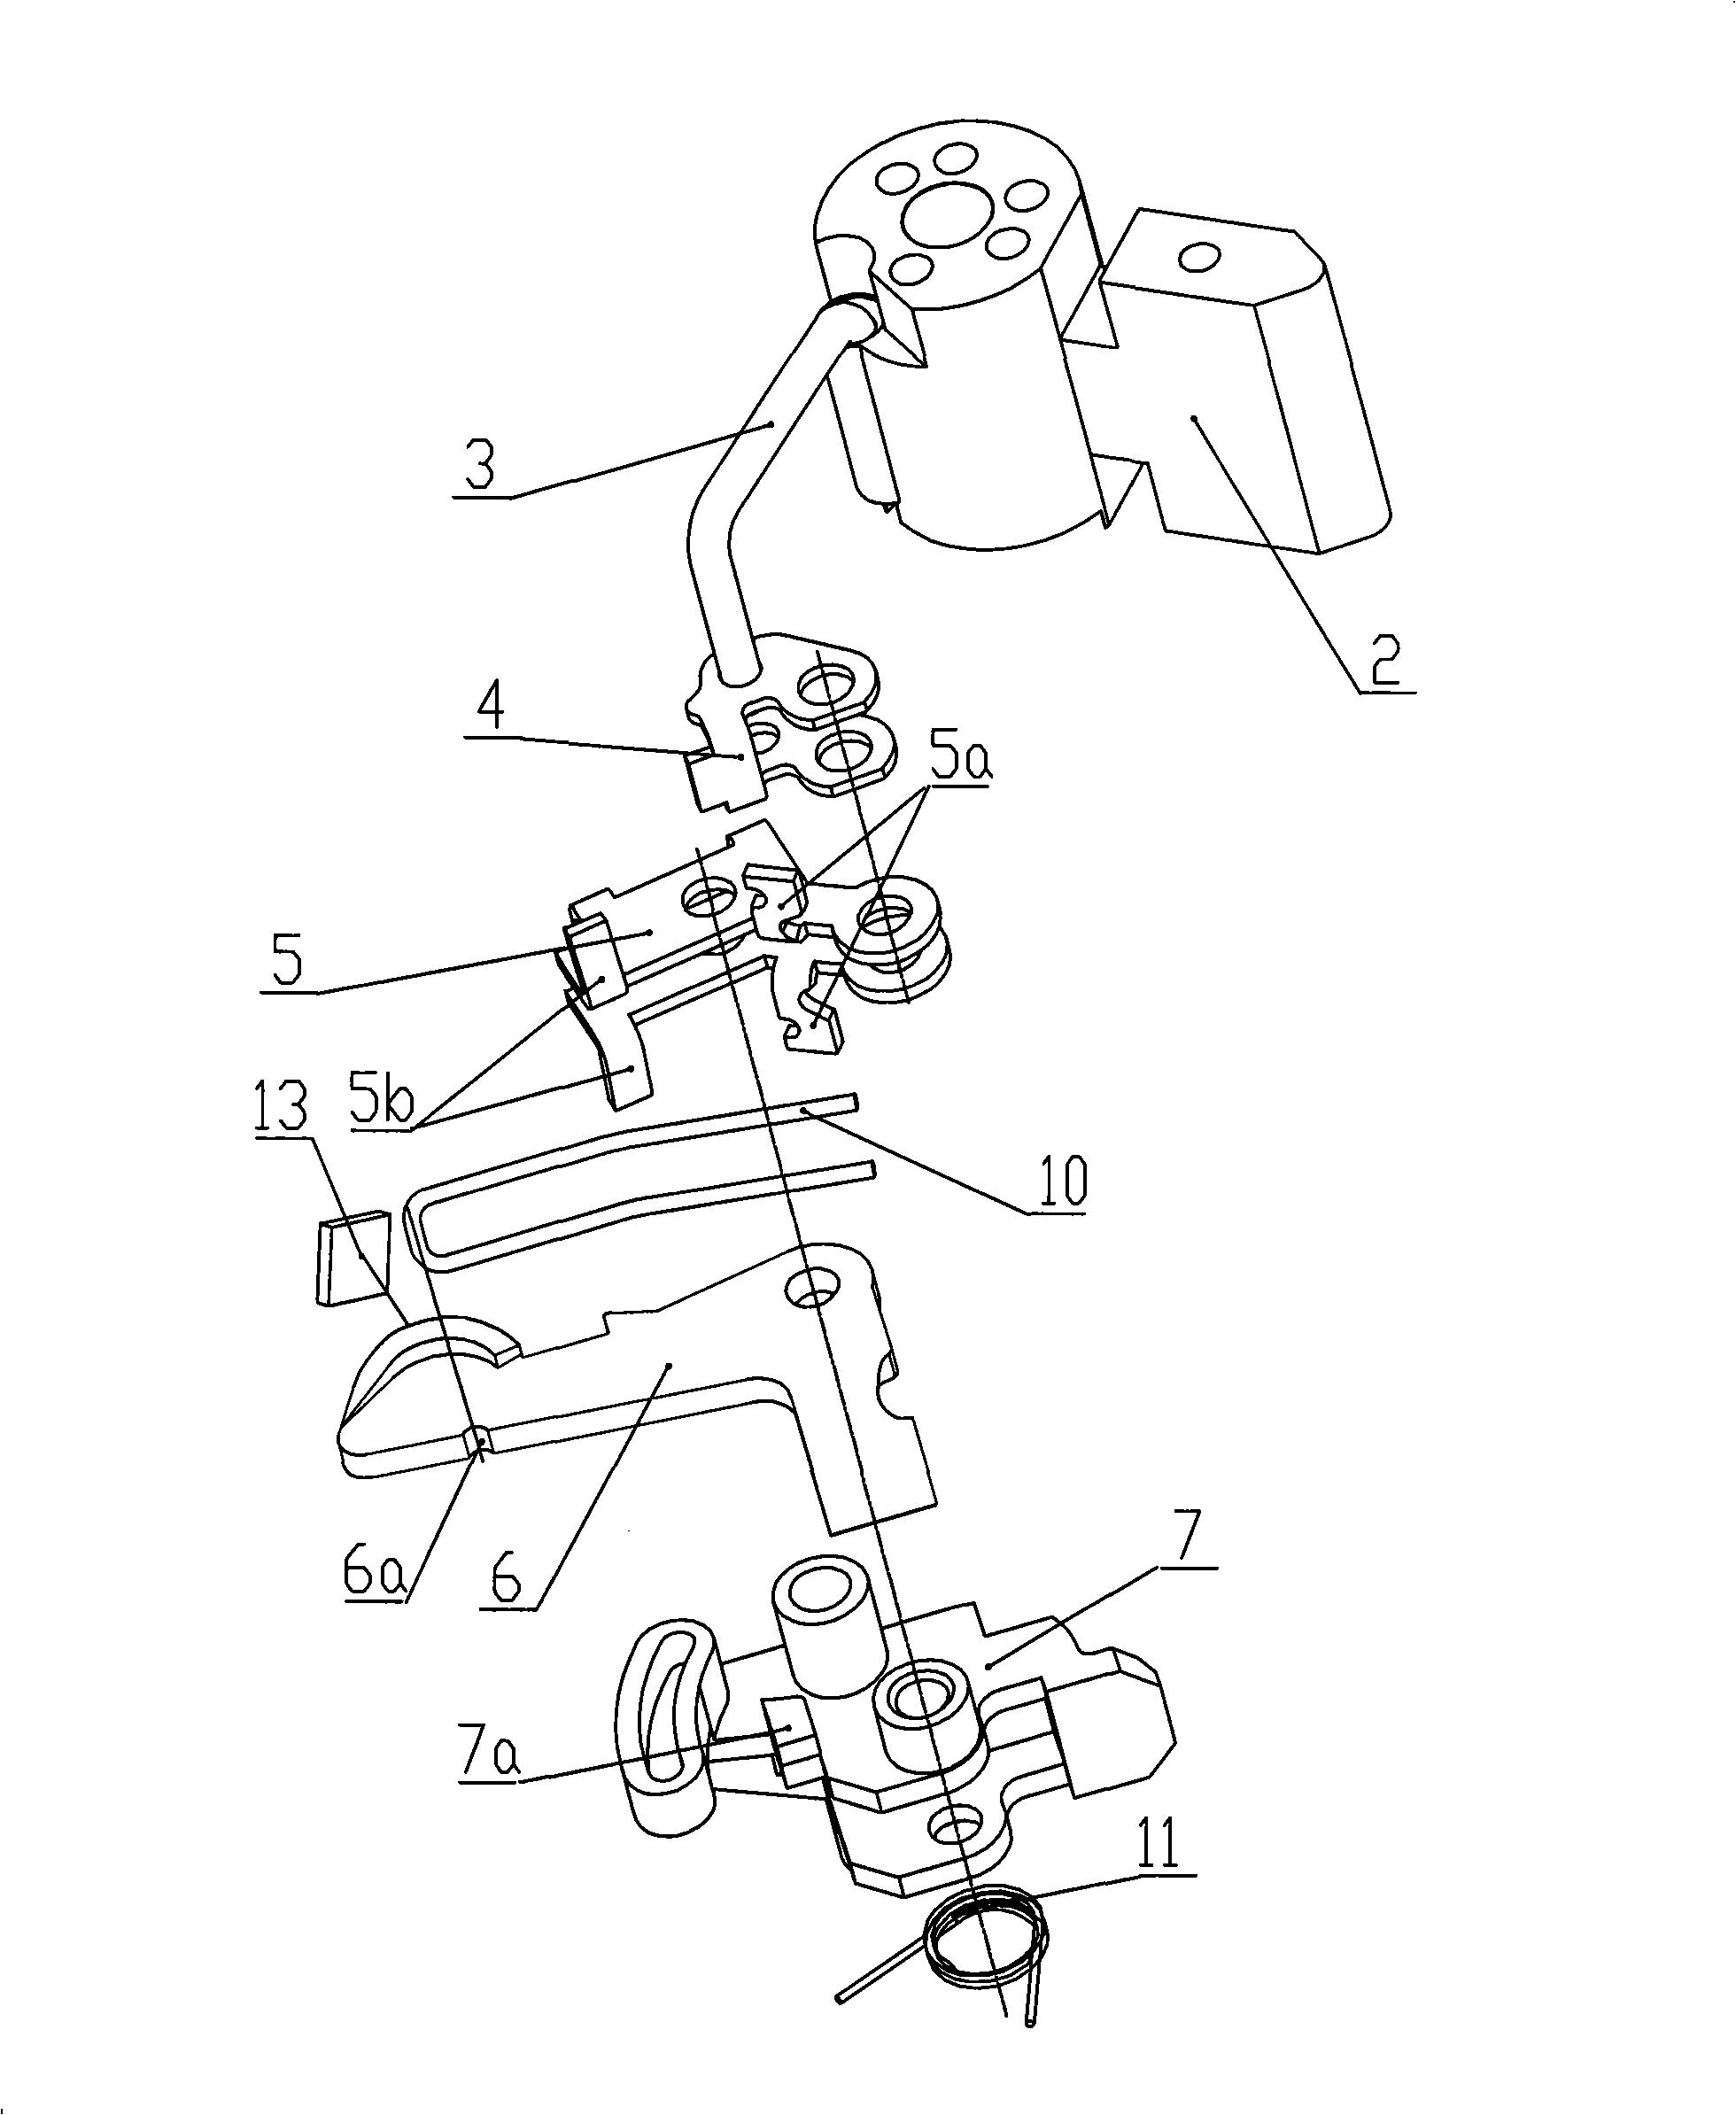 Operating mechanism of automatically jumping small circuit breaker